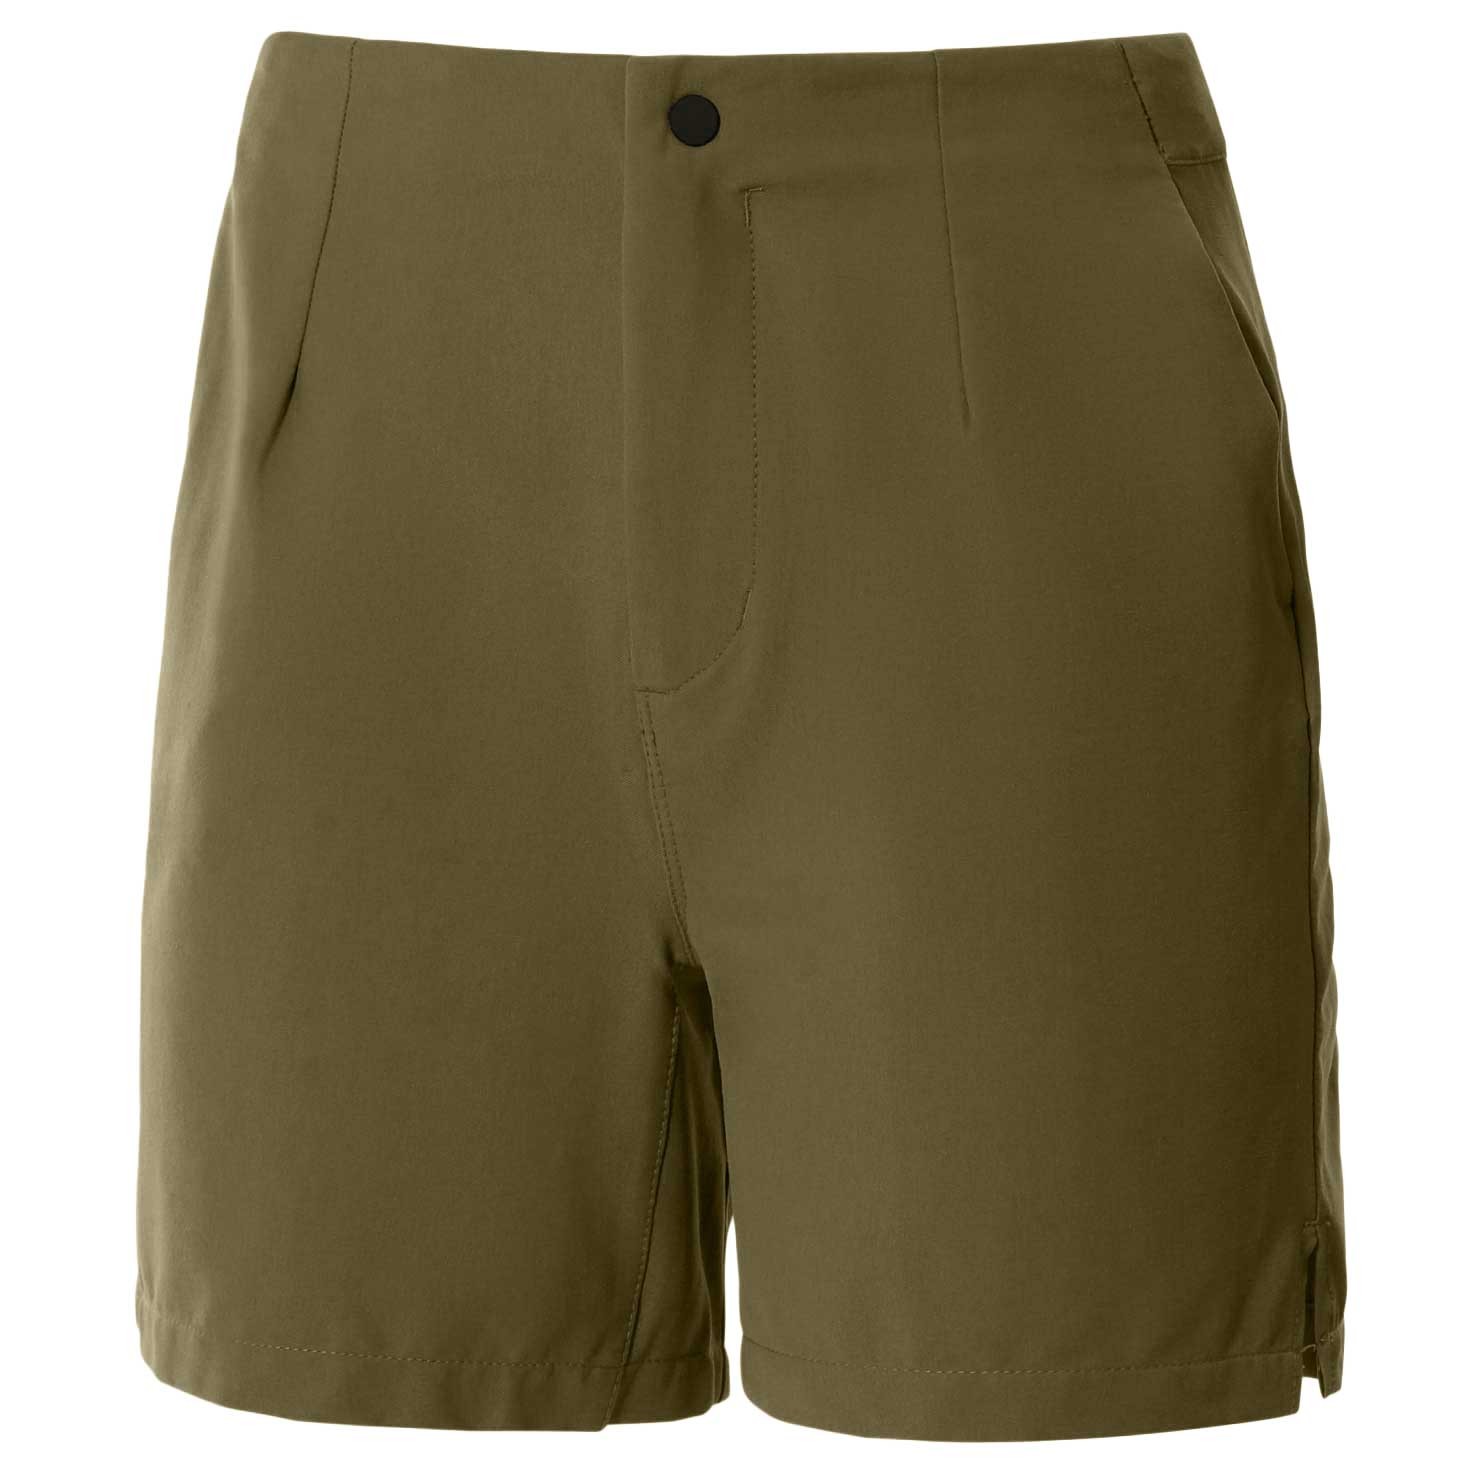 Image of The North Face Women's Project Shorts - Military Olive